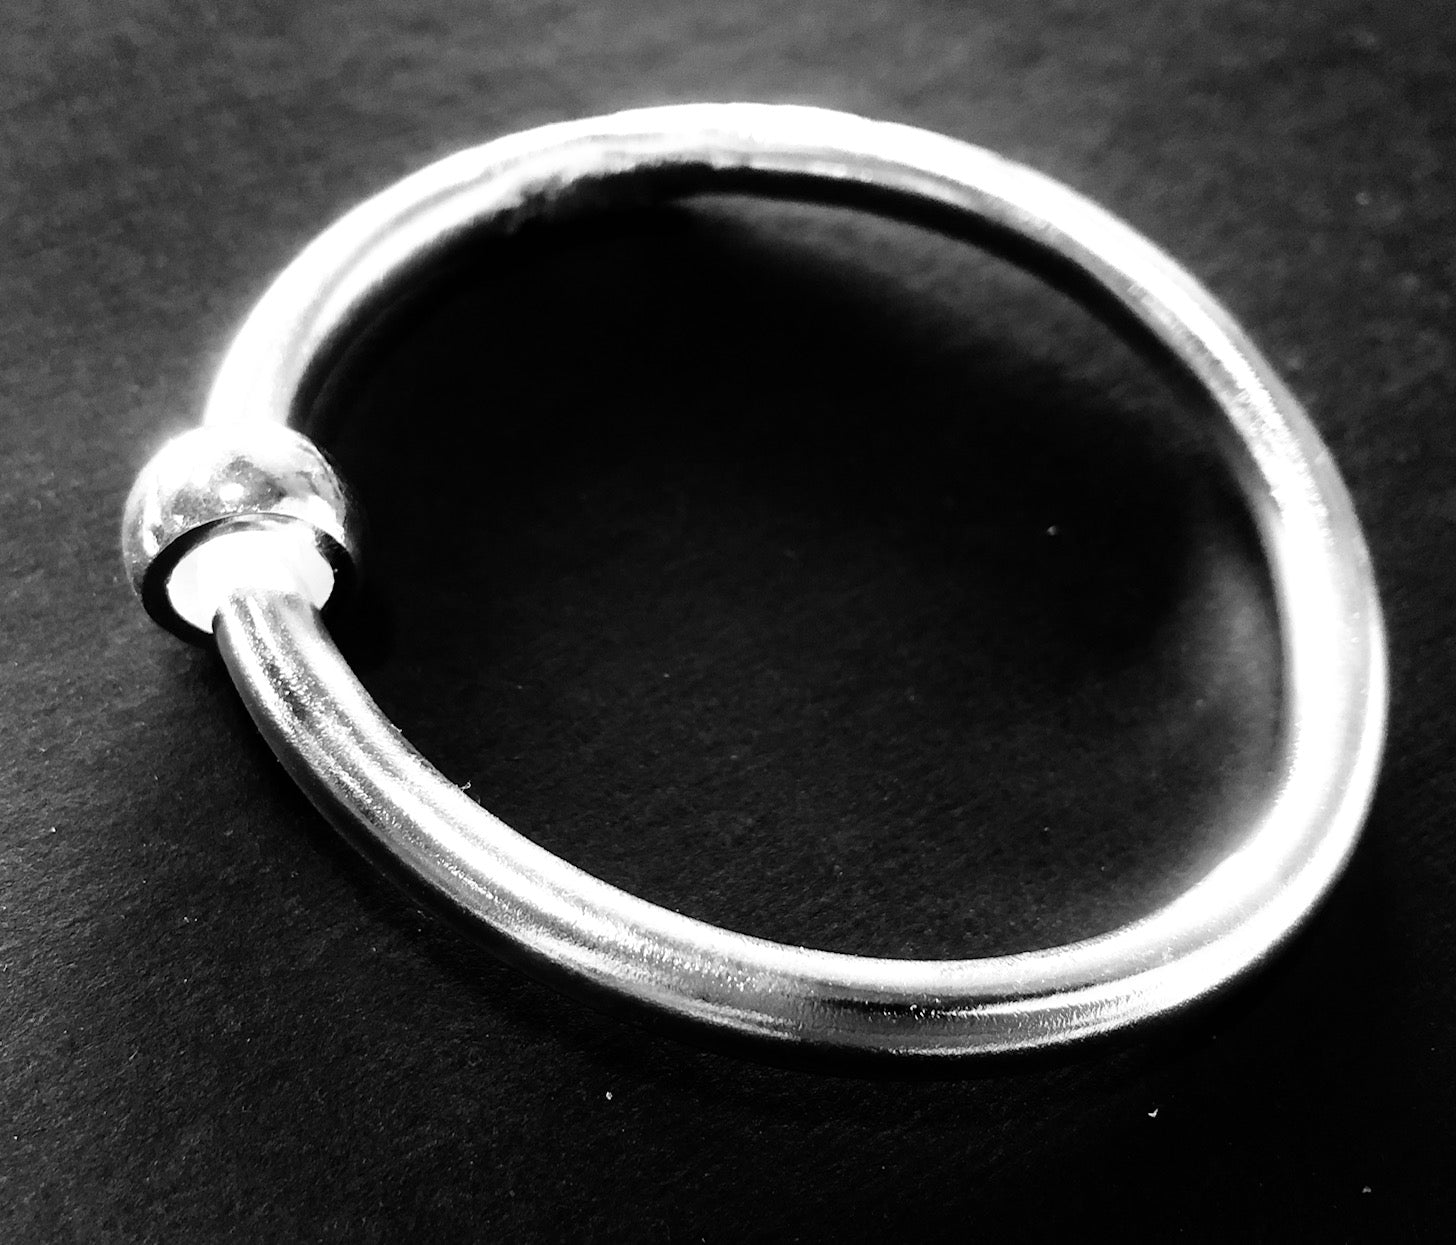 Classic silver bangle with bead